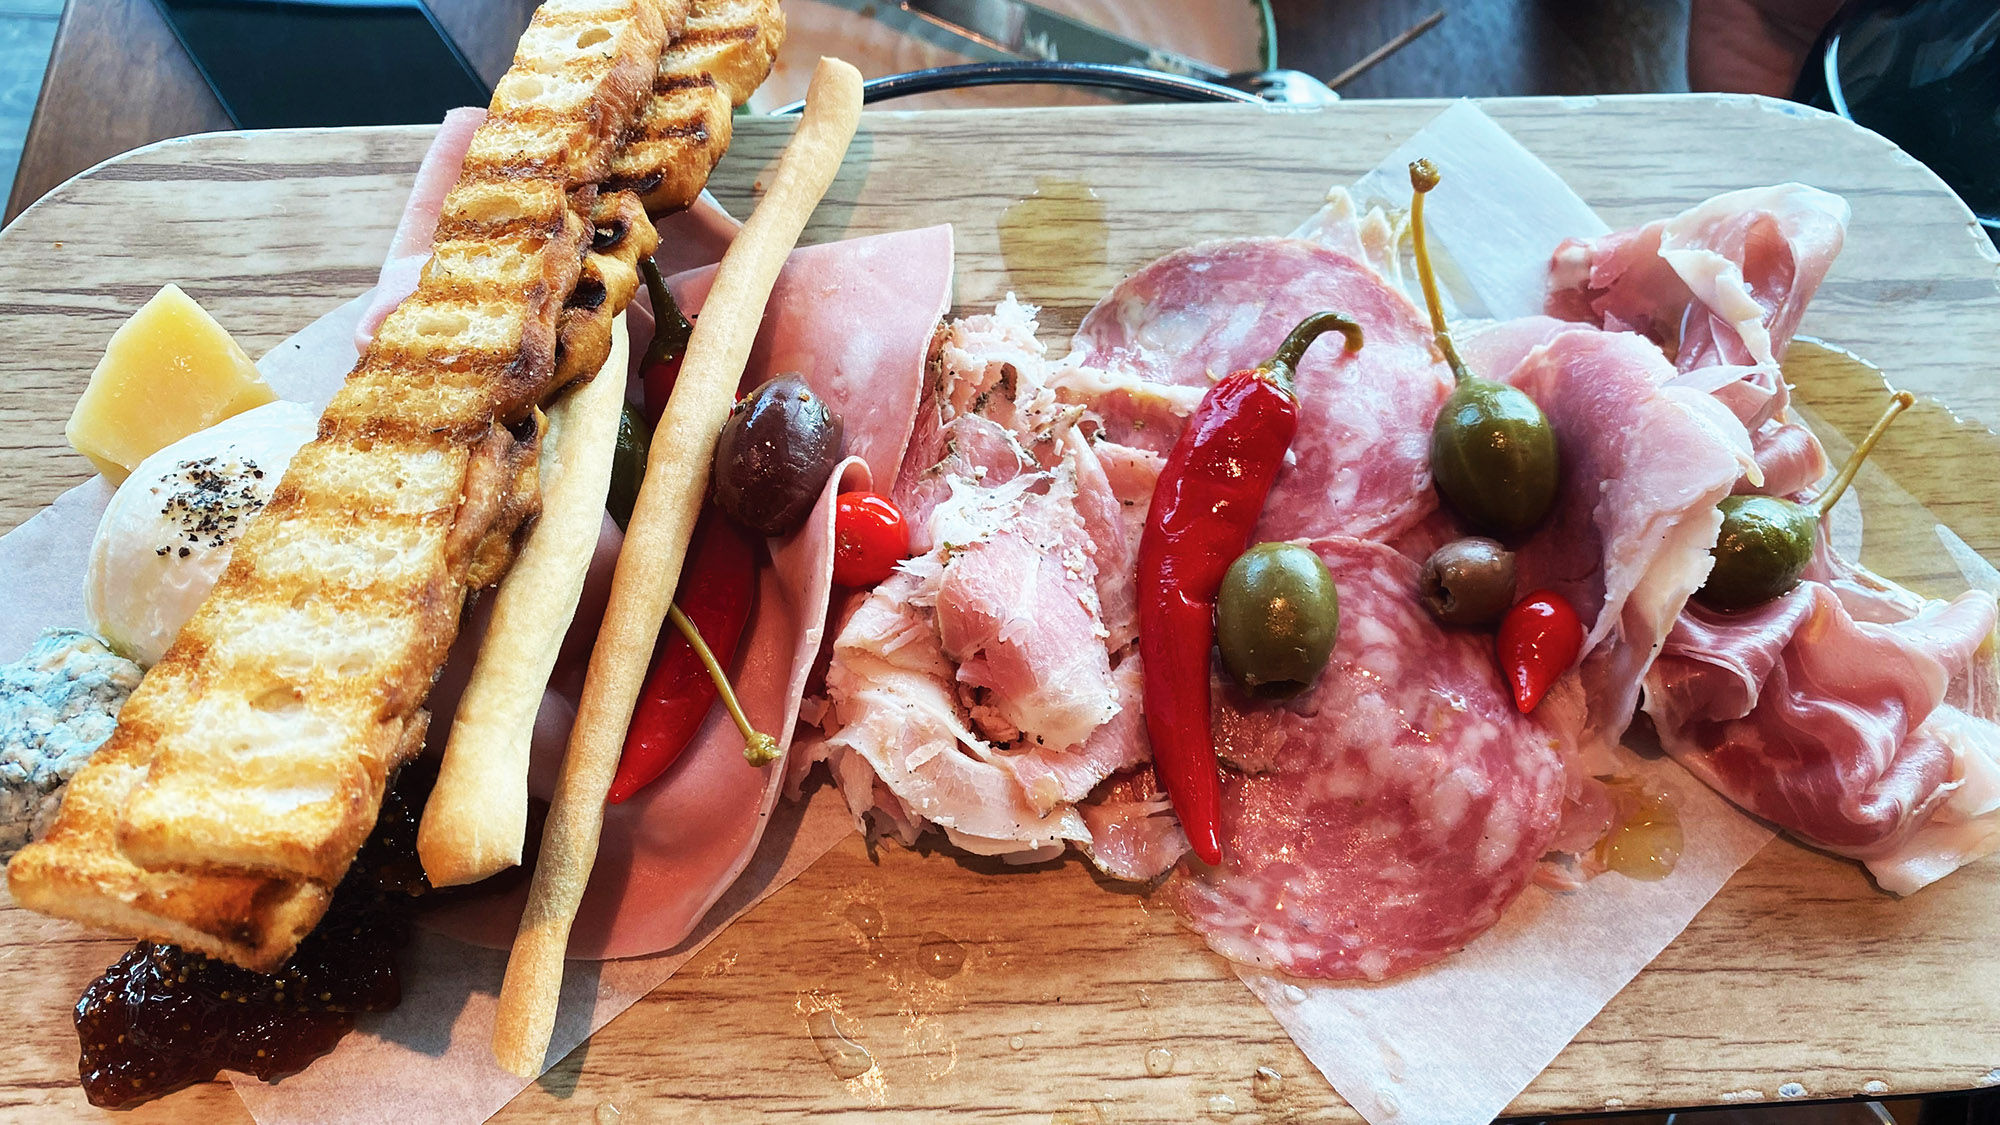 A charcuterie platter from Giovanni's Italian Kitchen, a restaurant added during the Freedom's Royal Amplified refit.